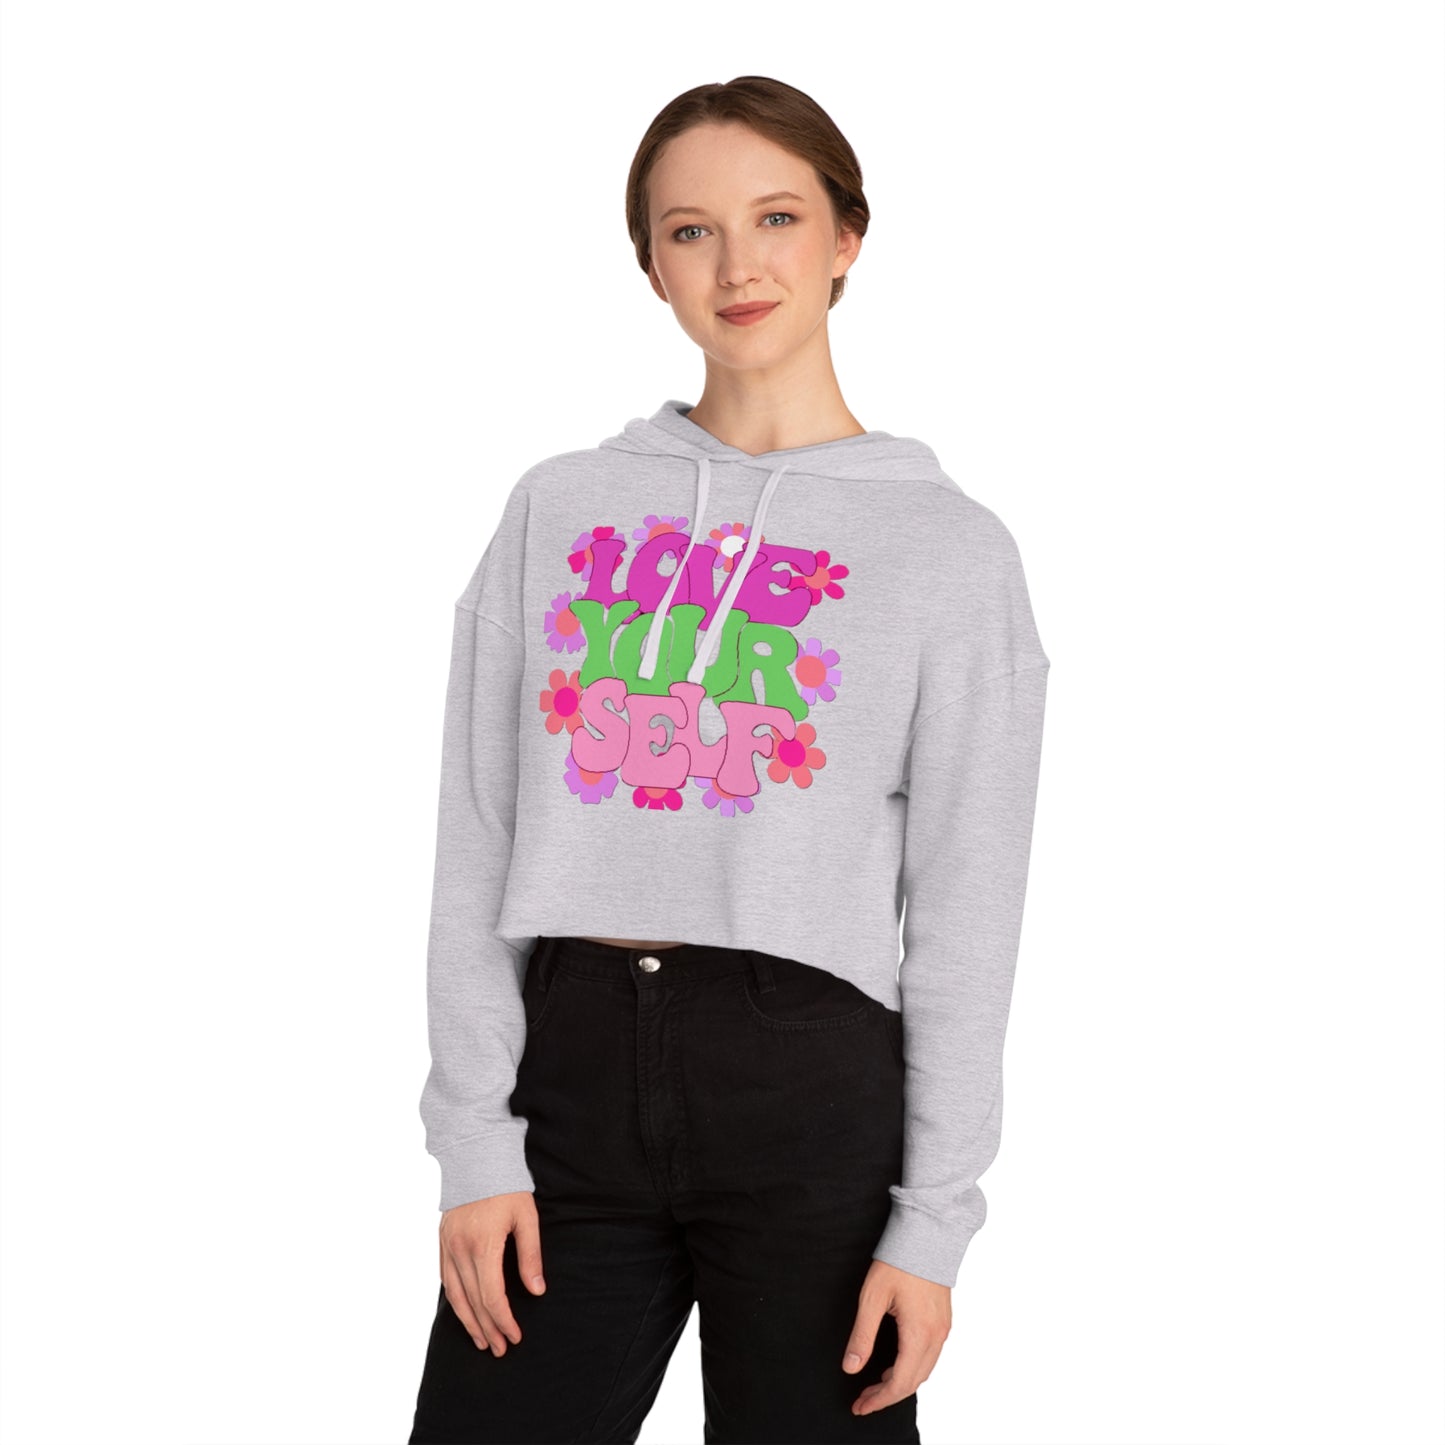 Bright and colorful “LOVE YOURSELF” Women’s Cropped Hooded Sweatshirt for your enjoyment.